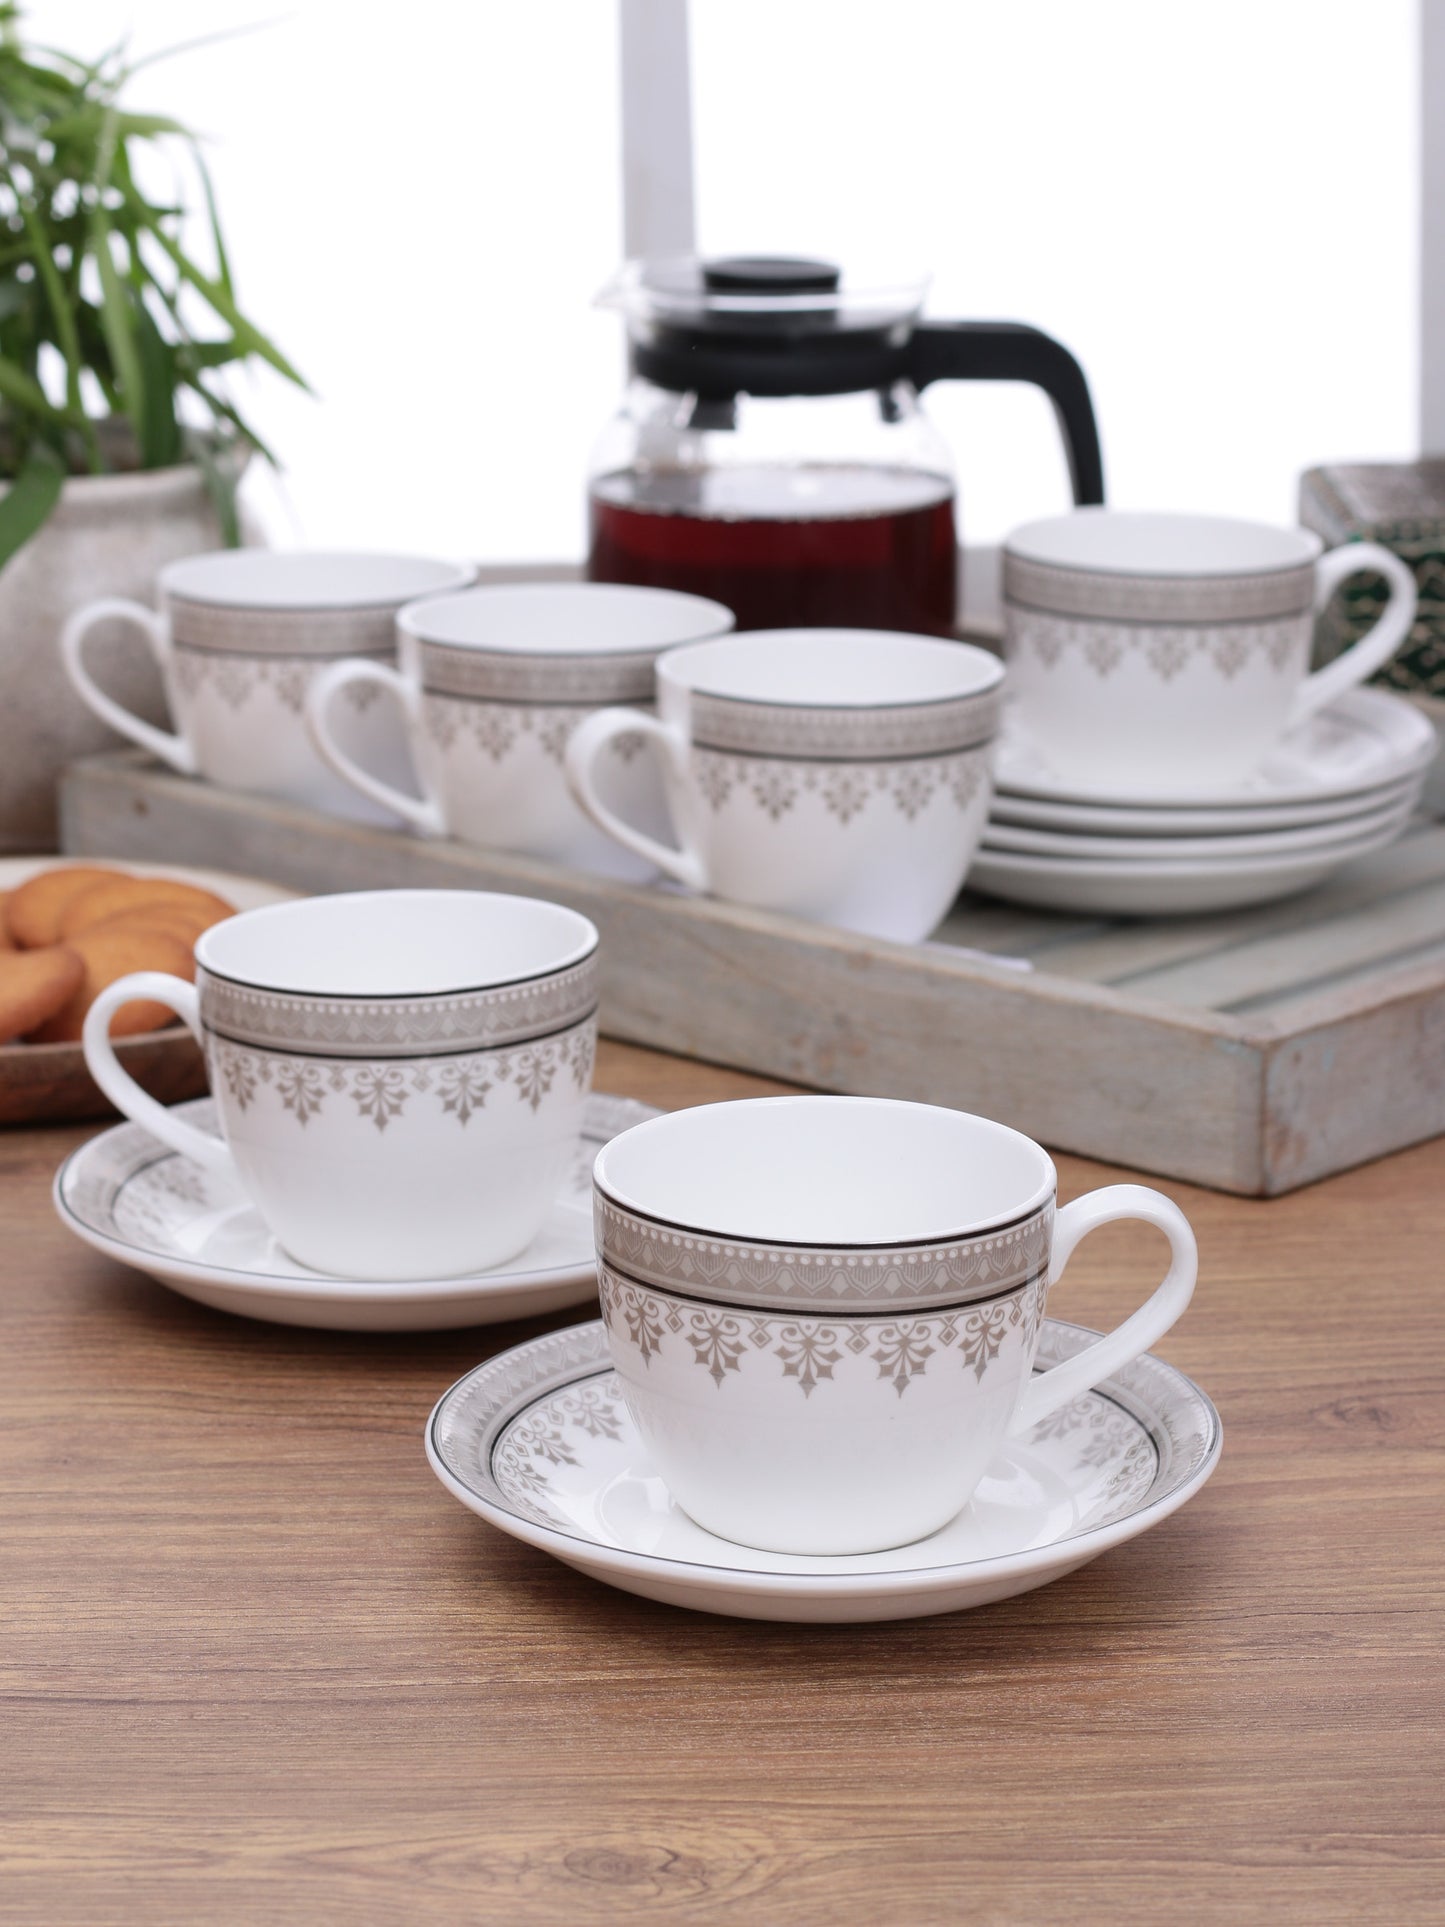 Cream Super Cup & Saucer, 210ml, Set of 12 (6 Cups + 6 Saucers) (S369)